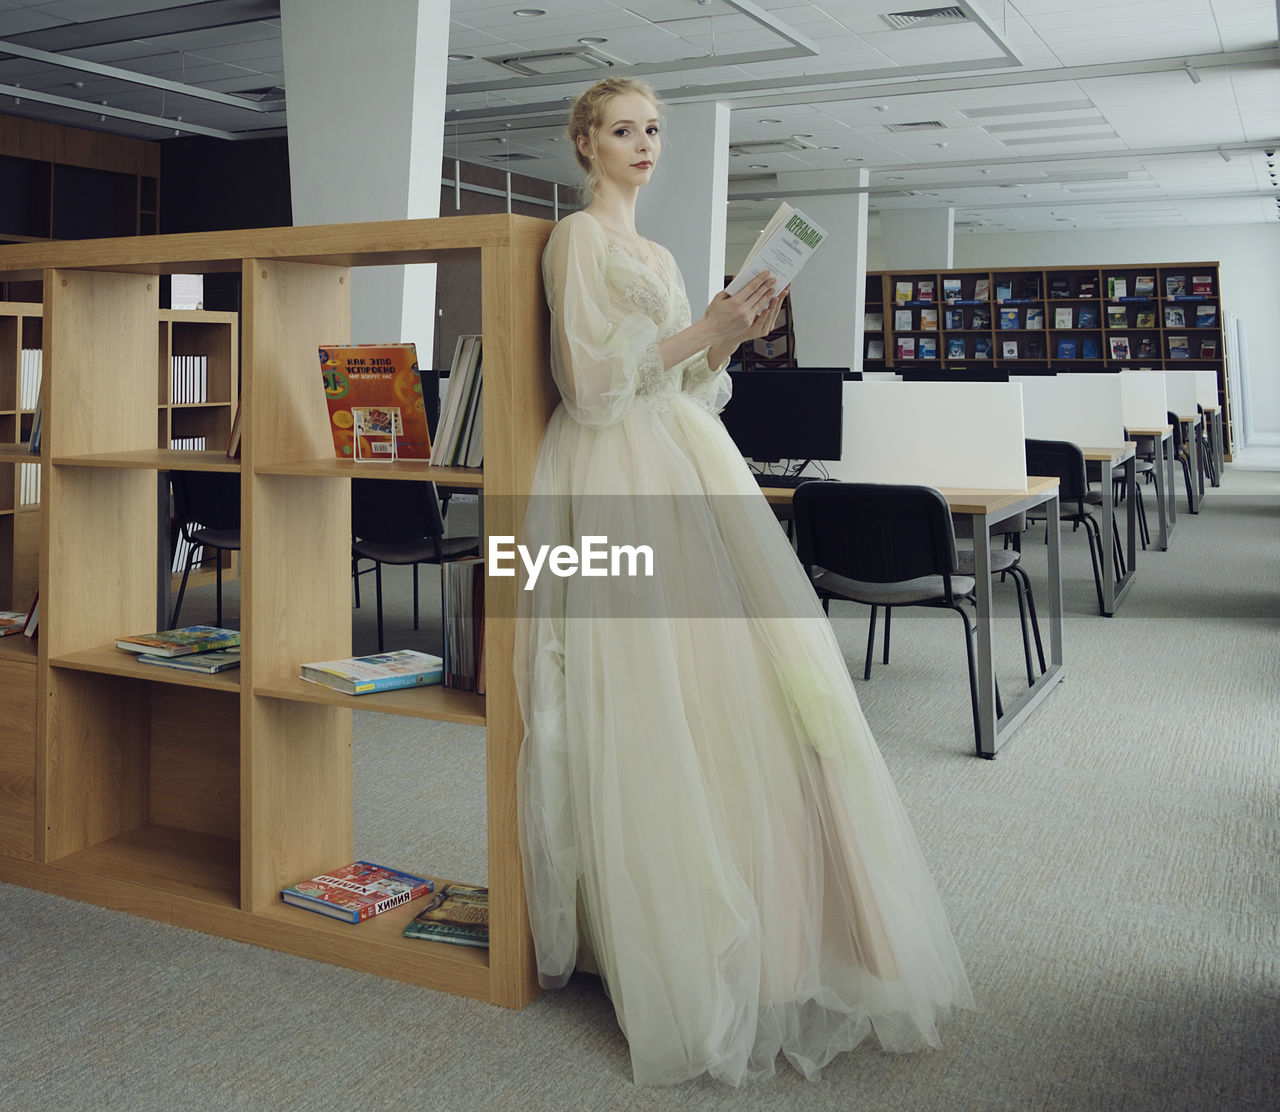 A charming ballerina went to the library to choose a new book during a break 